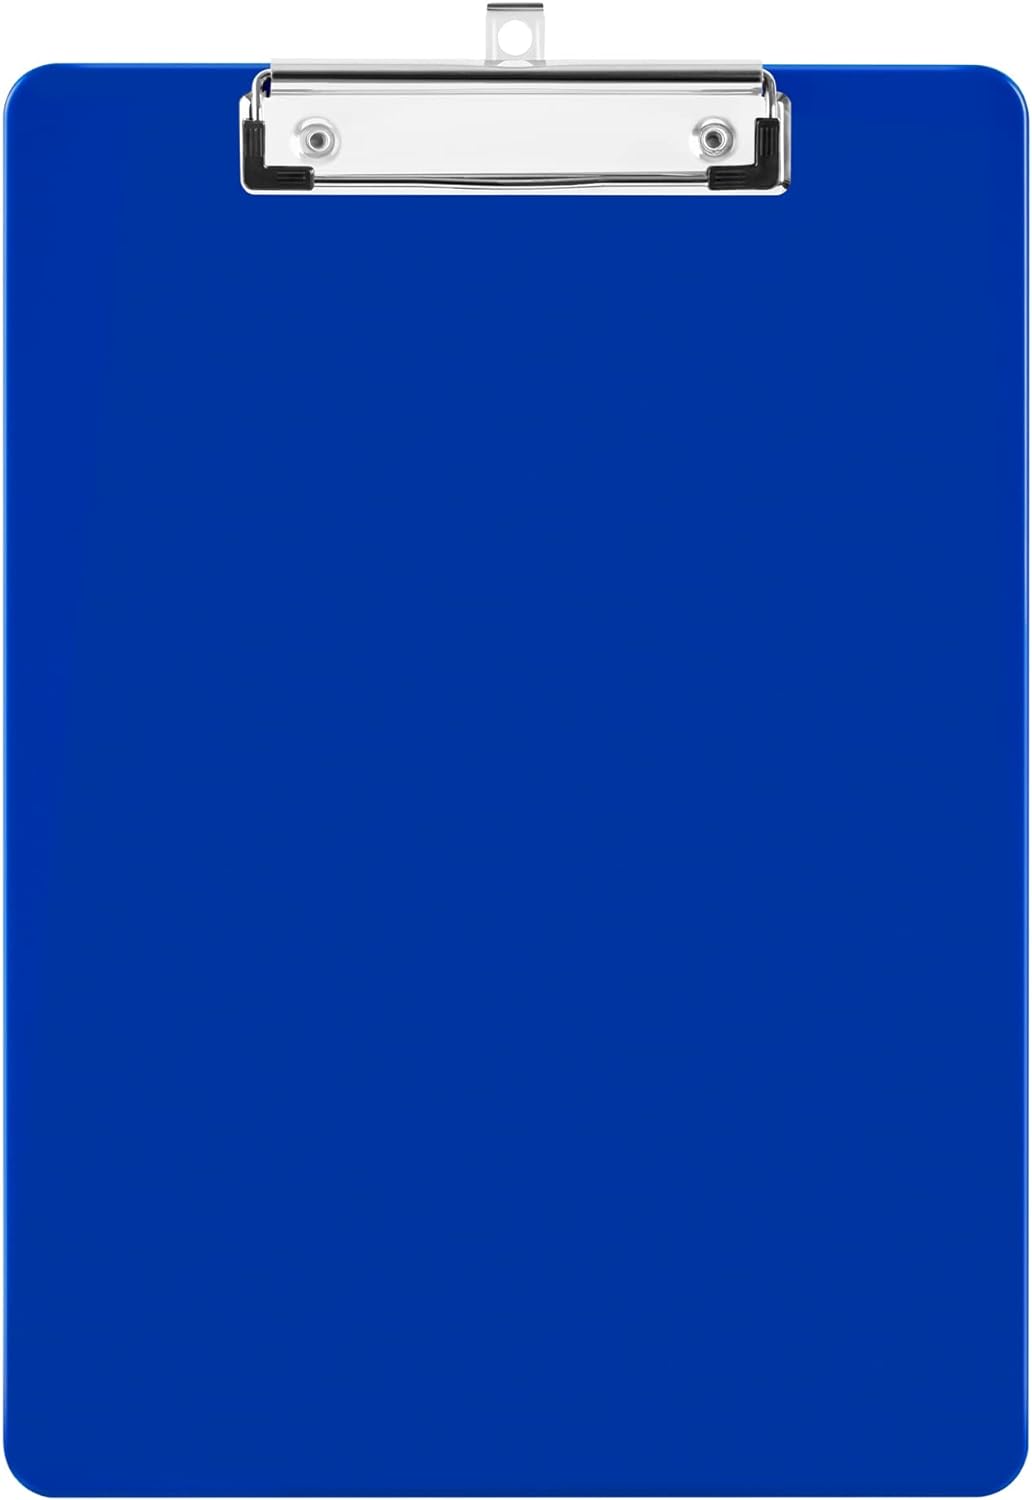 Deli Plastic Clipboard, Clipboards with Low Profile Clip, Standard A4 Letter Size Clipboard for Office, Nurses, Students, and Women, Size 12.4 9 Inch, Blue